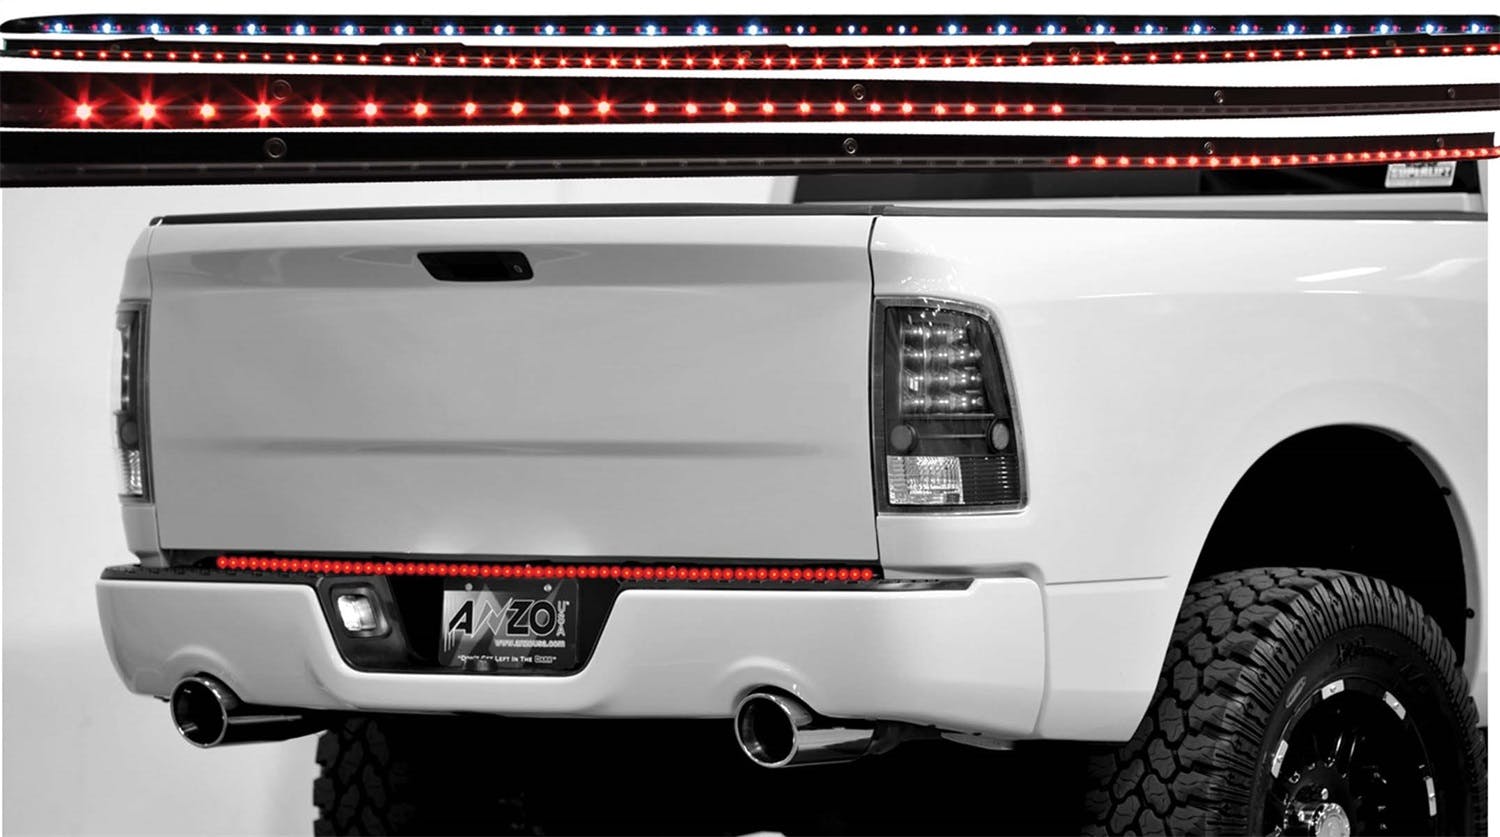 AnzoUSA 531045 LED Tailgate Bar without Reverse, 60" 4 Function